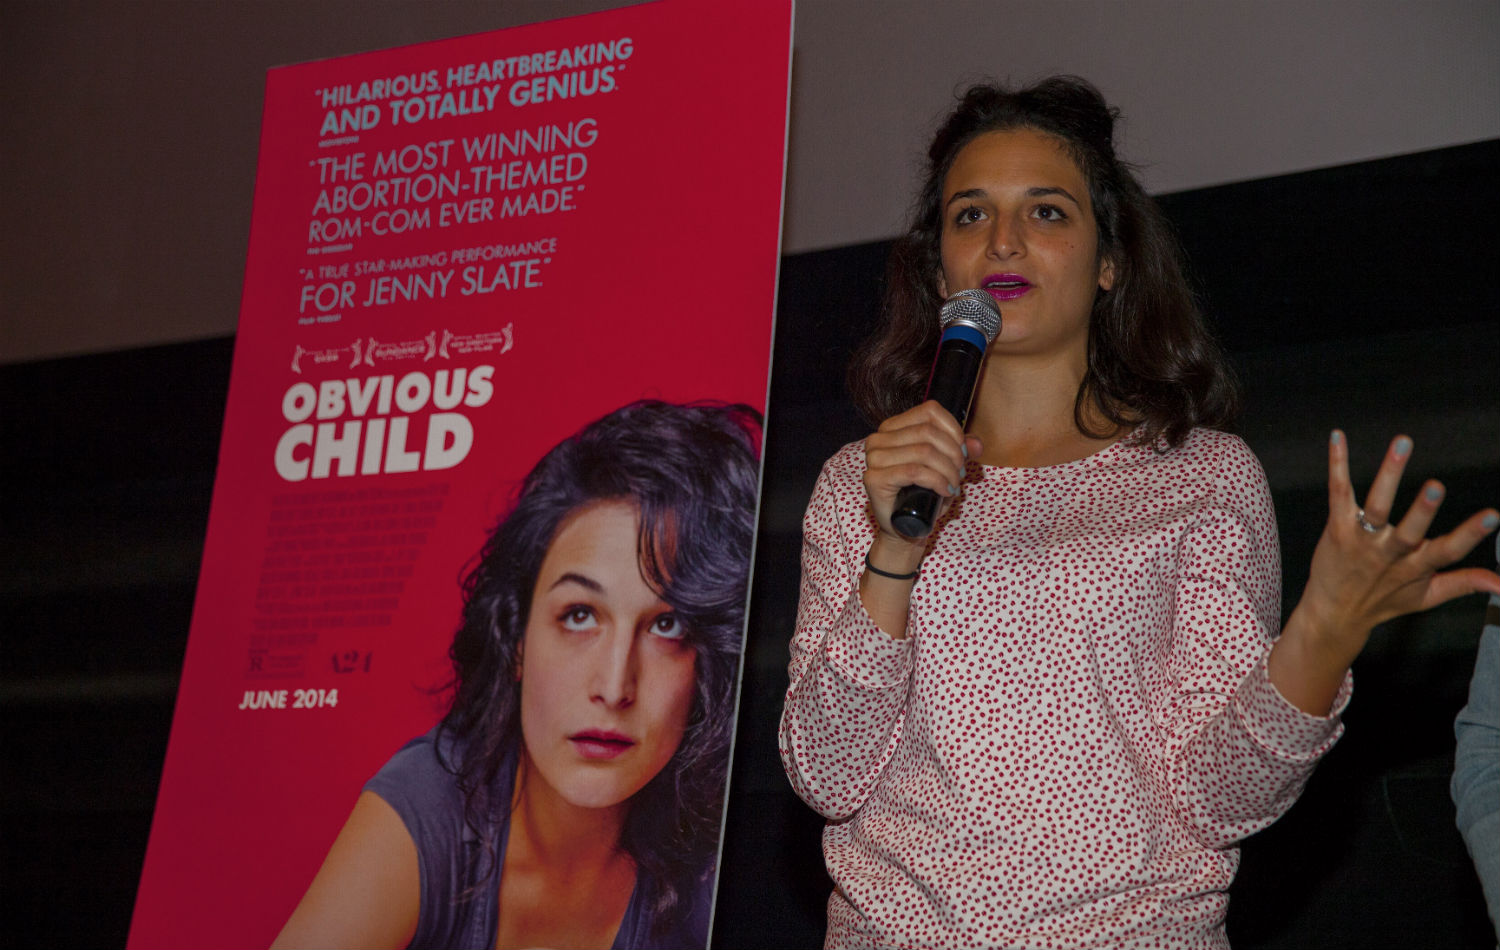 ‘Obvious Child,’ the Abortion Comedy, Isn’t a Great Film, but It’s a Revelation